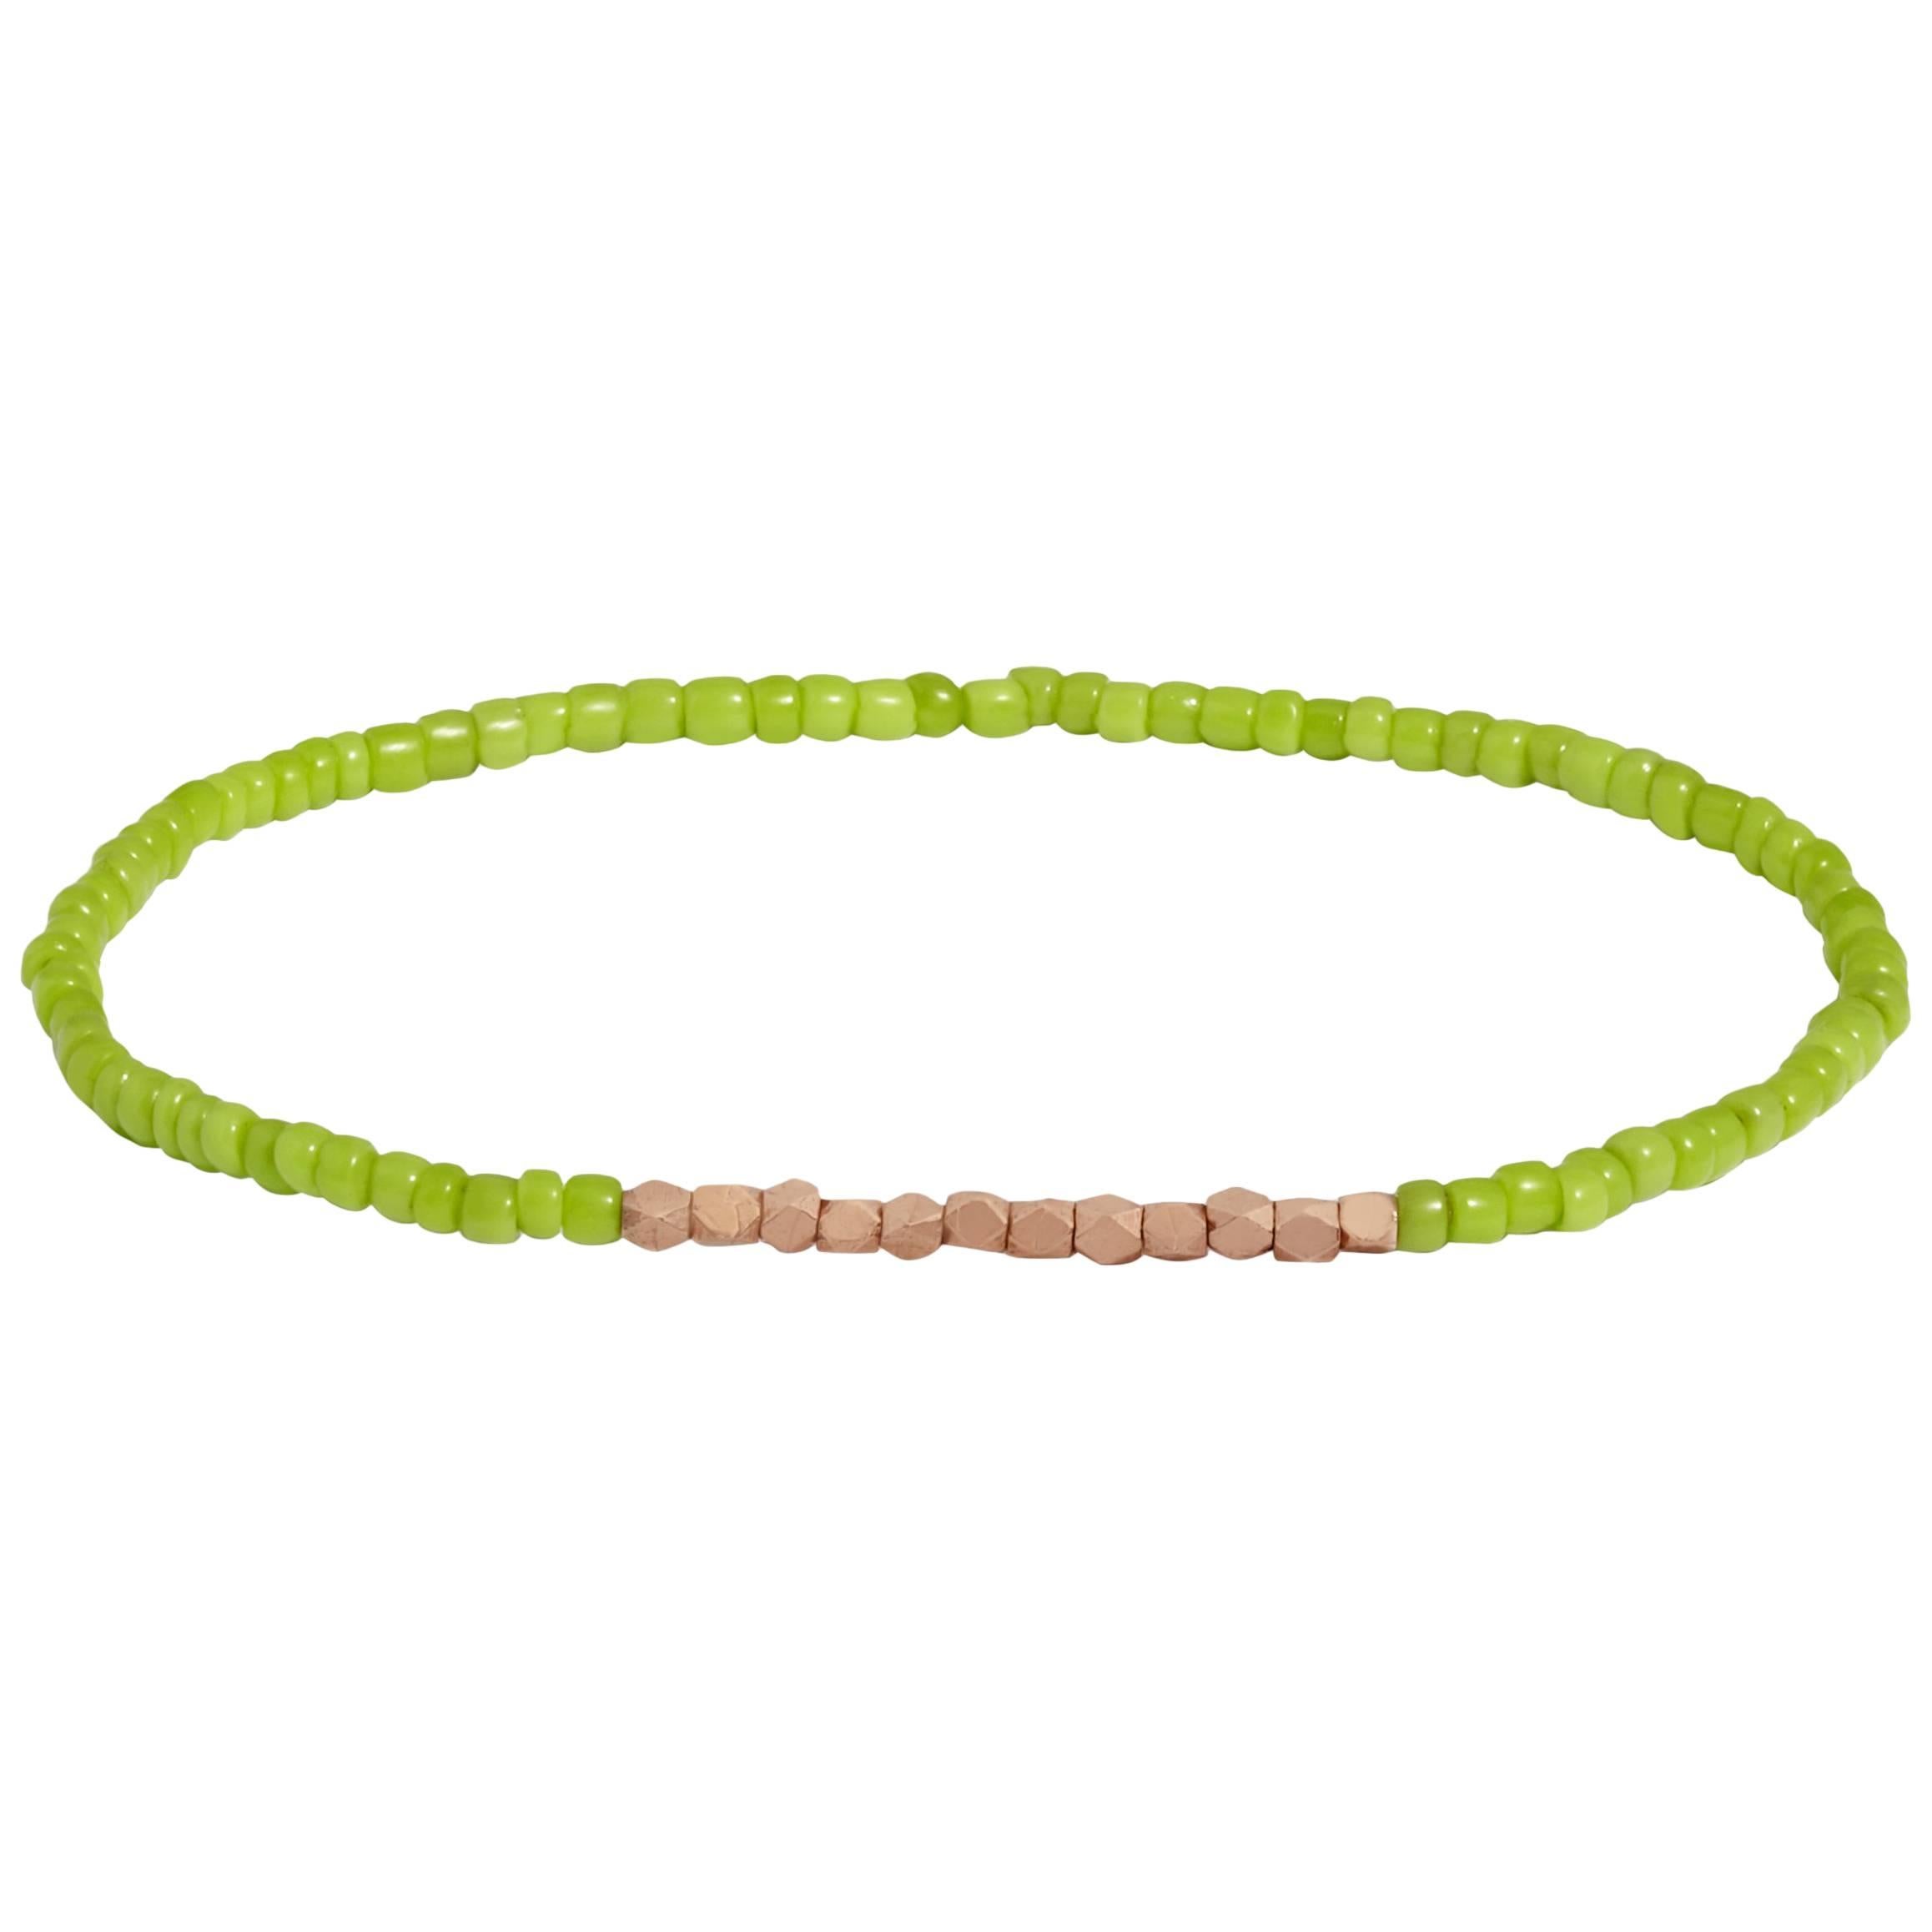 Vintage Lime Green Beaded Bracelet with Rose Gold by Allison Bryan